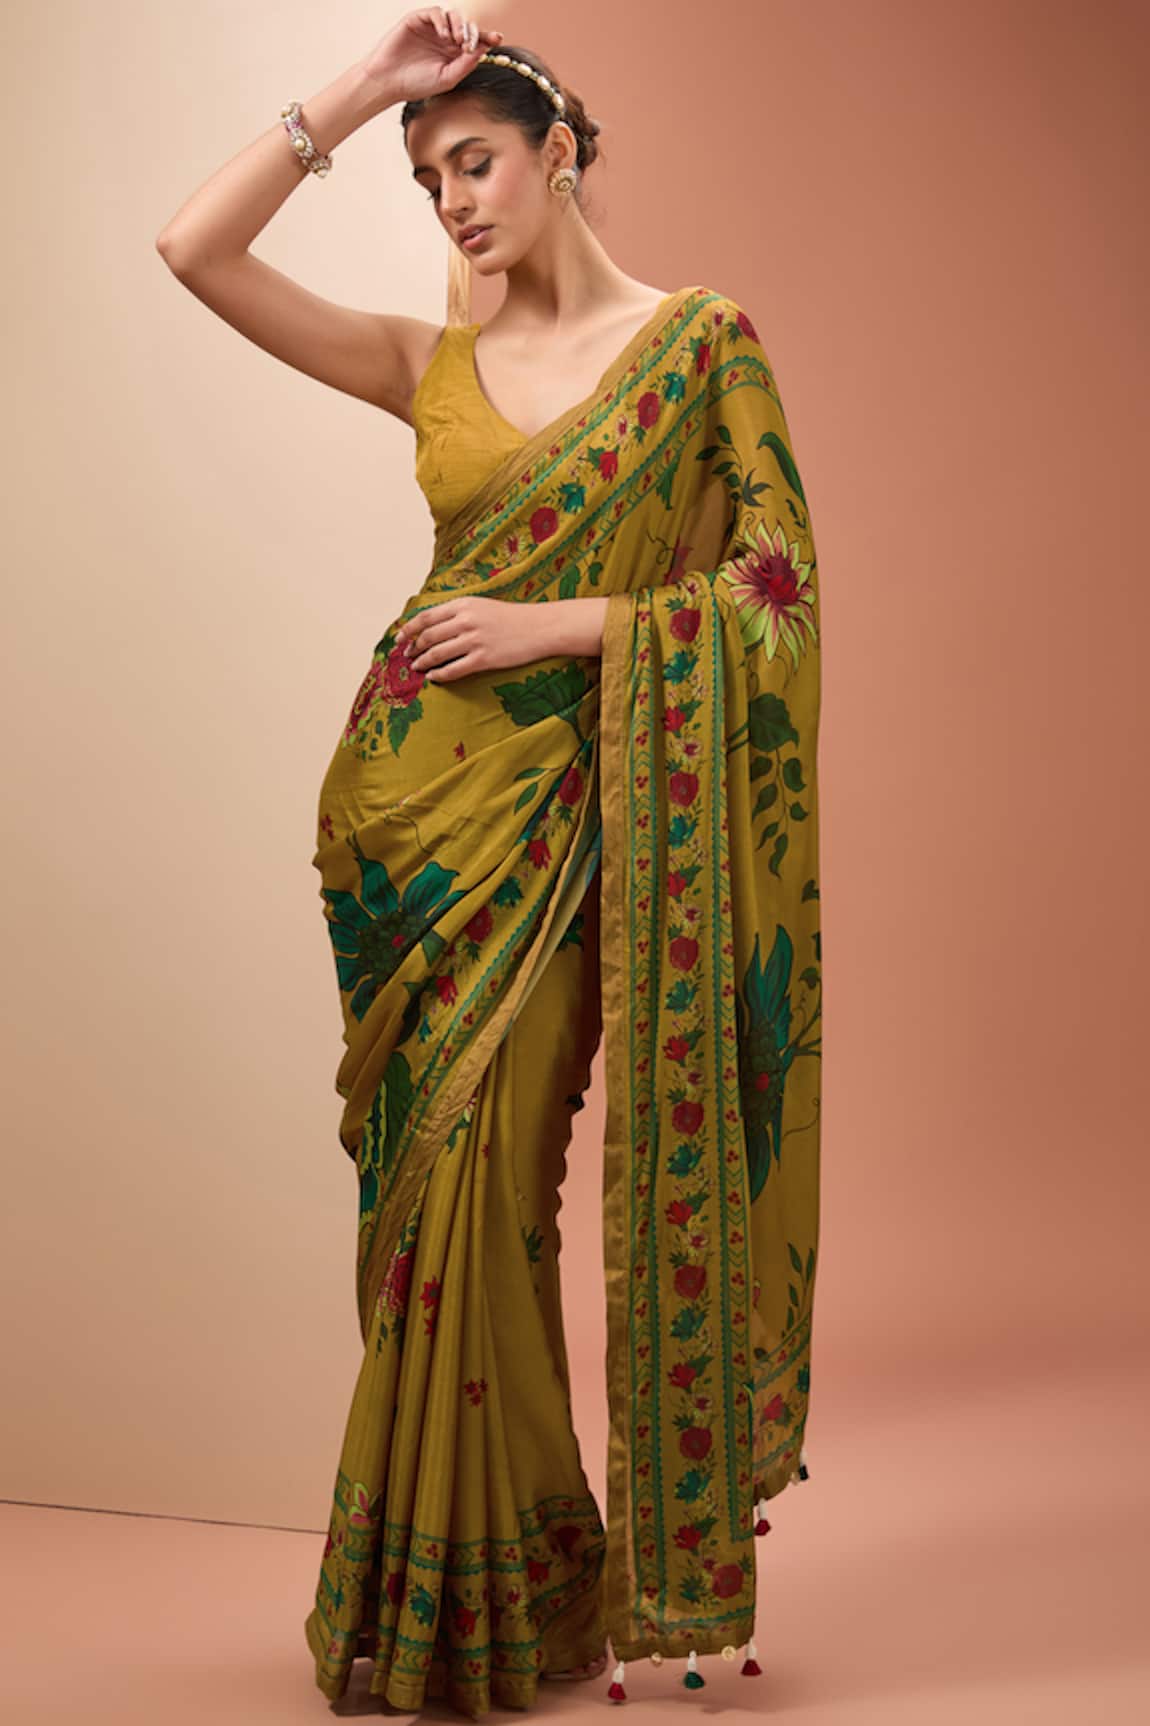 fcity.in - Sarees Silk Collectionsarees Under 250sarees Under 700sarees  Under